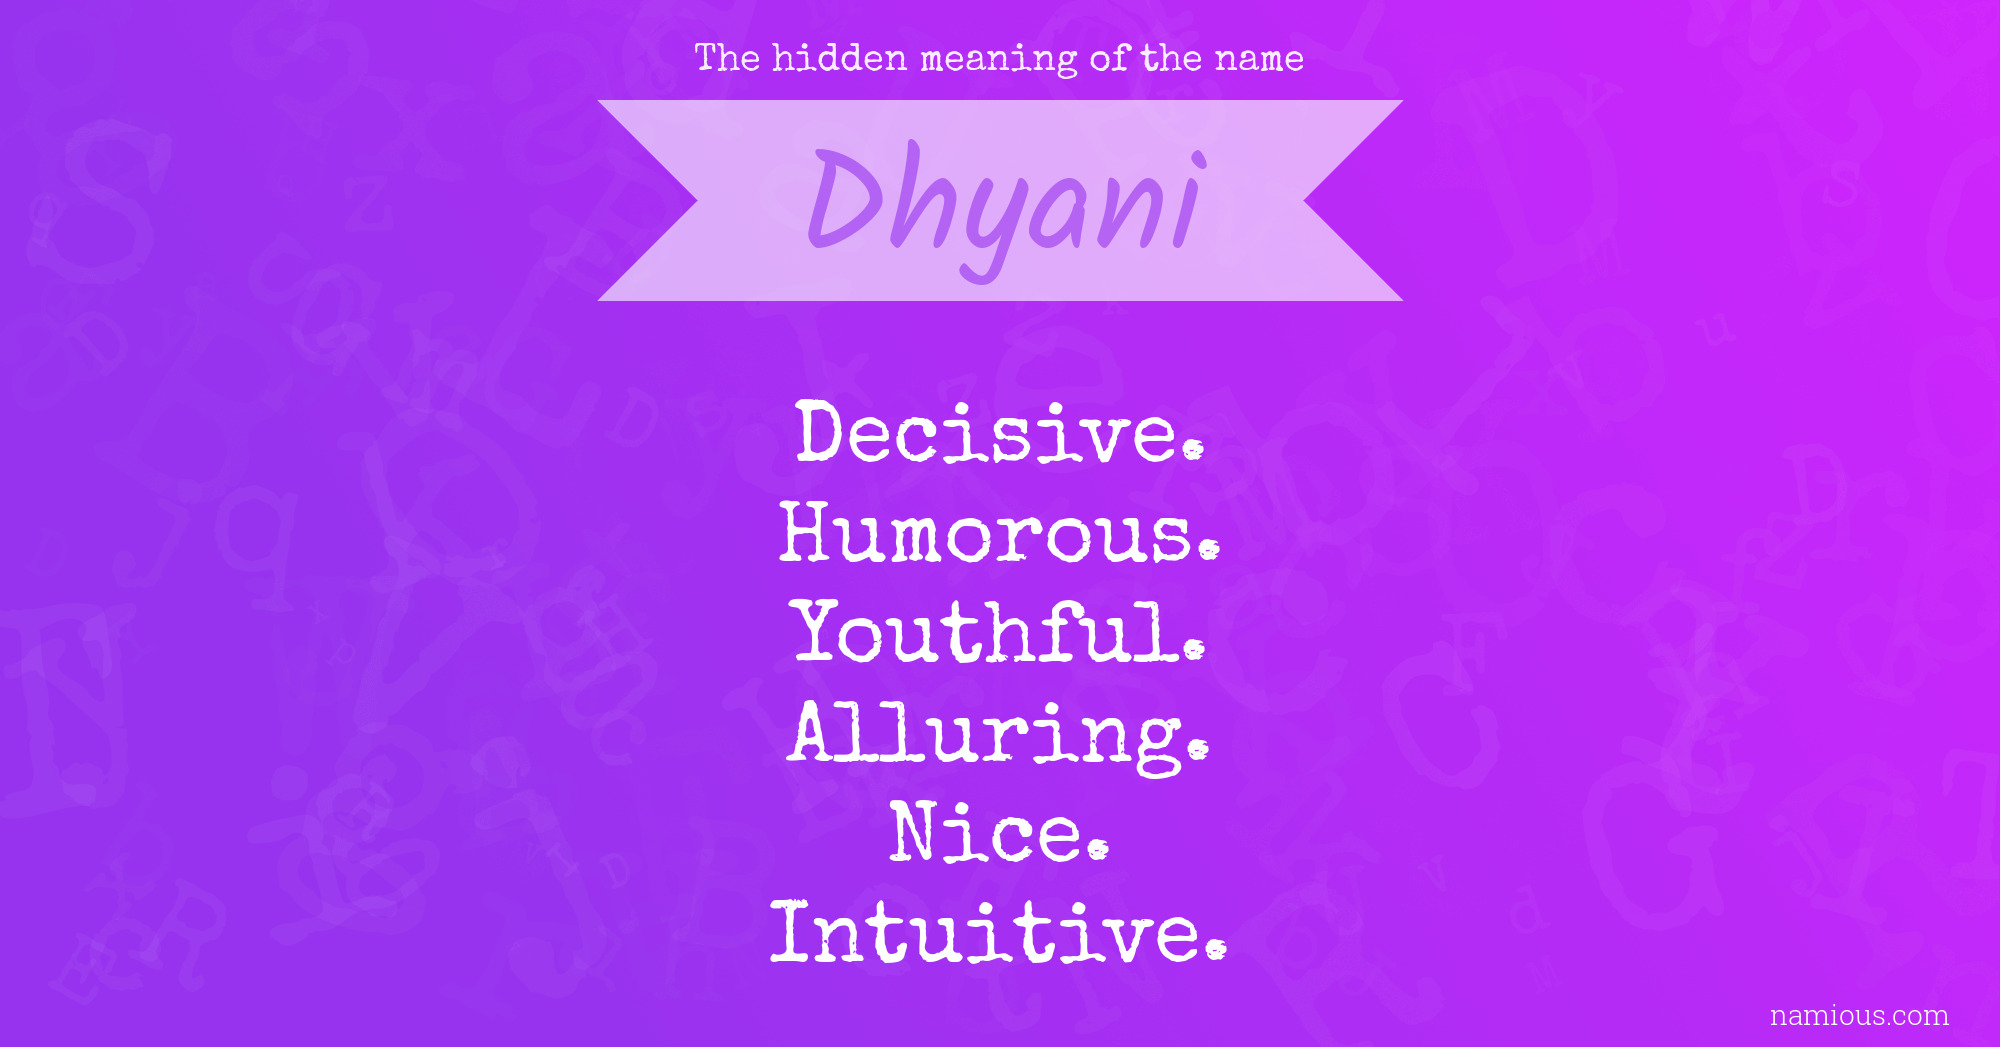 The hidden meaning of the name Dhyani